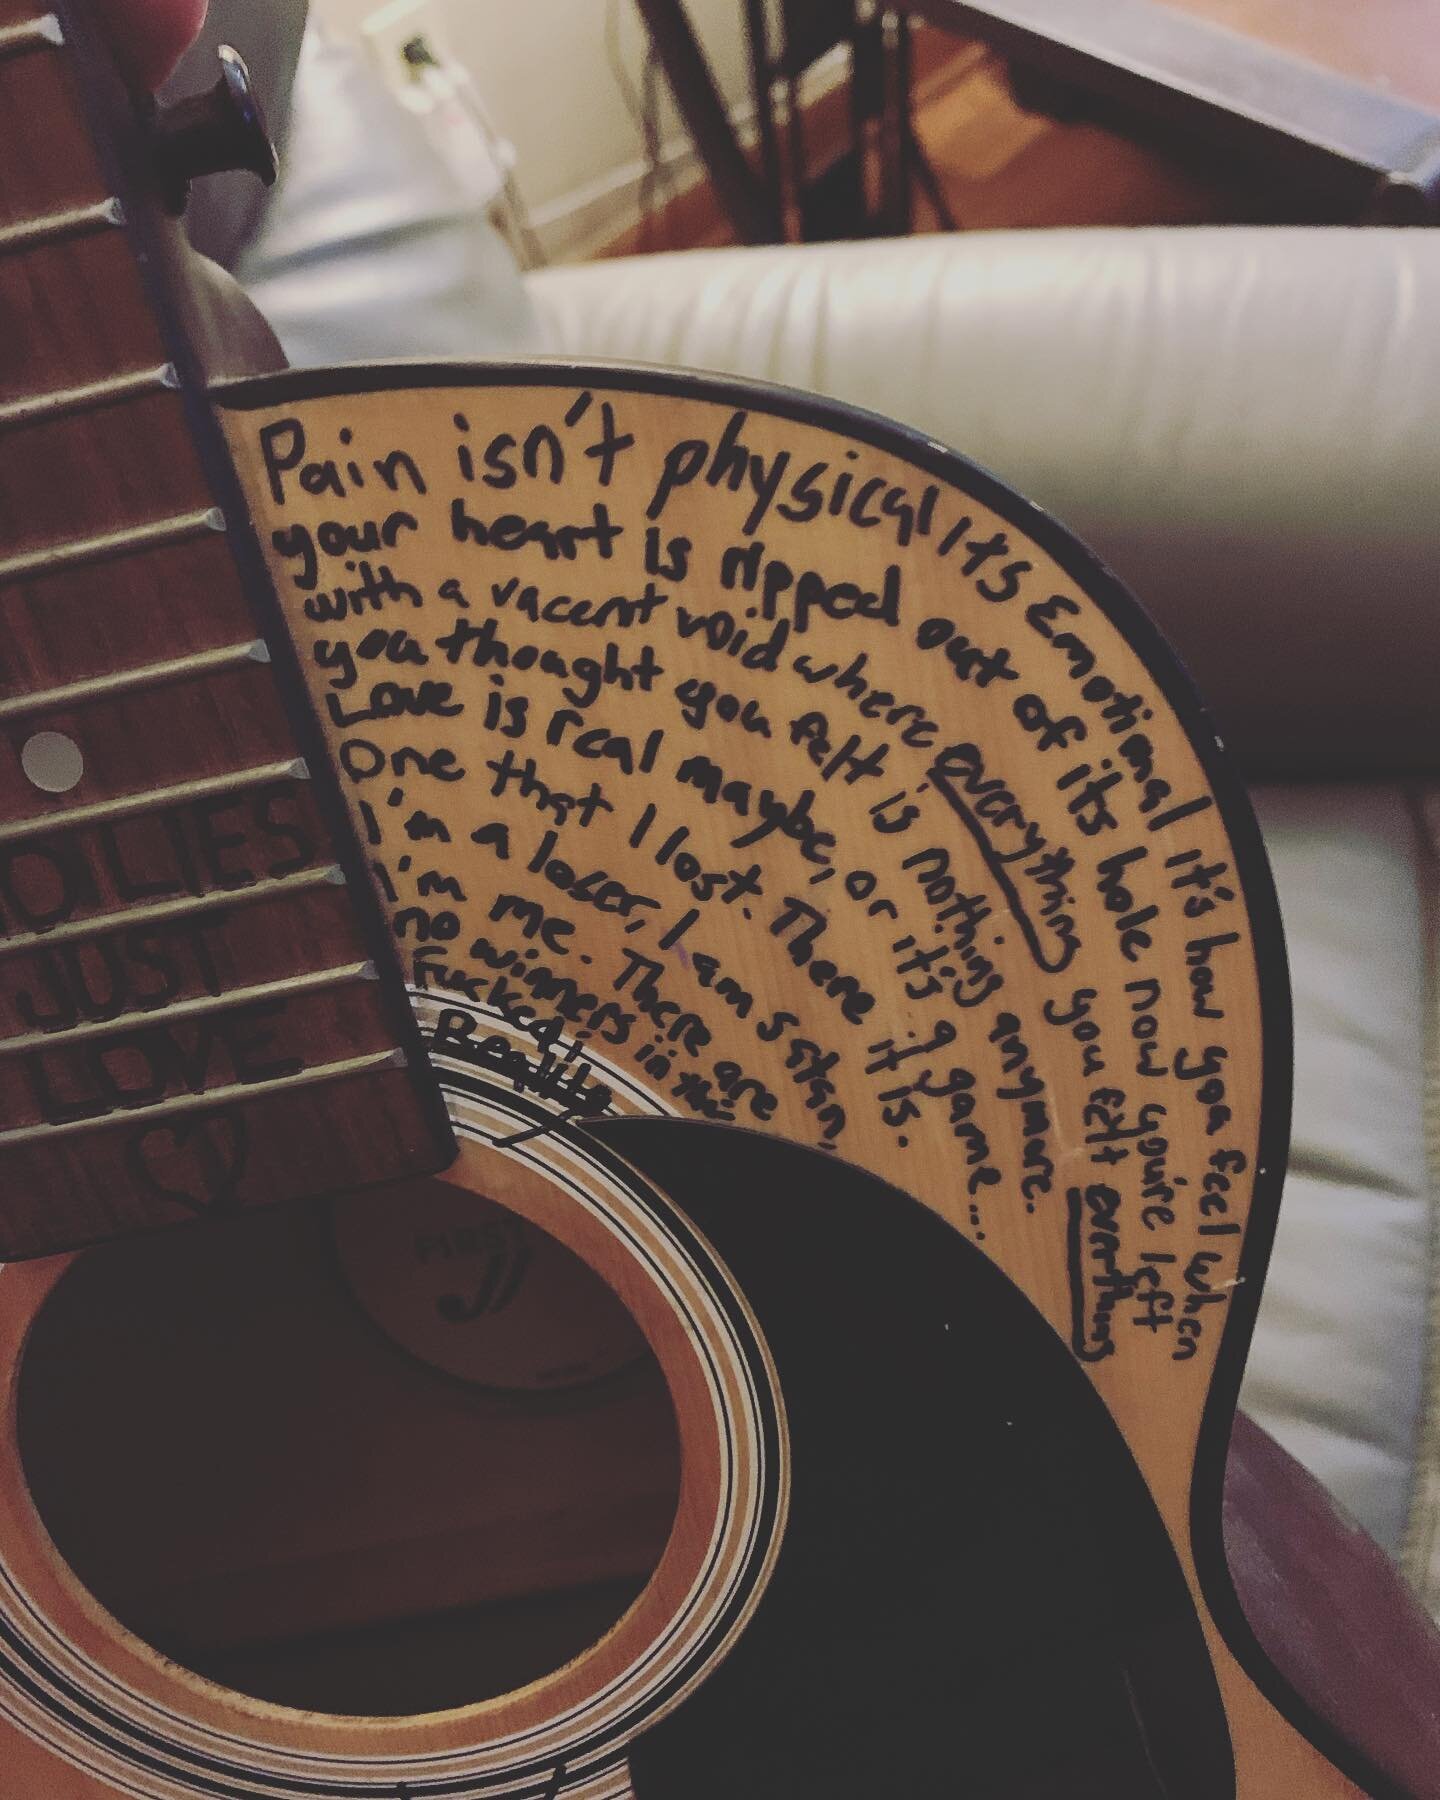 The beauty of the written language is that it can connect people, even people who have never met, across time. Recently, one of my cousins passed away and this is a photo of his guitar 🎸. The written word means that even when someone is no longer wi